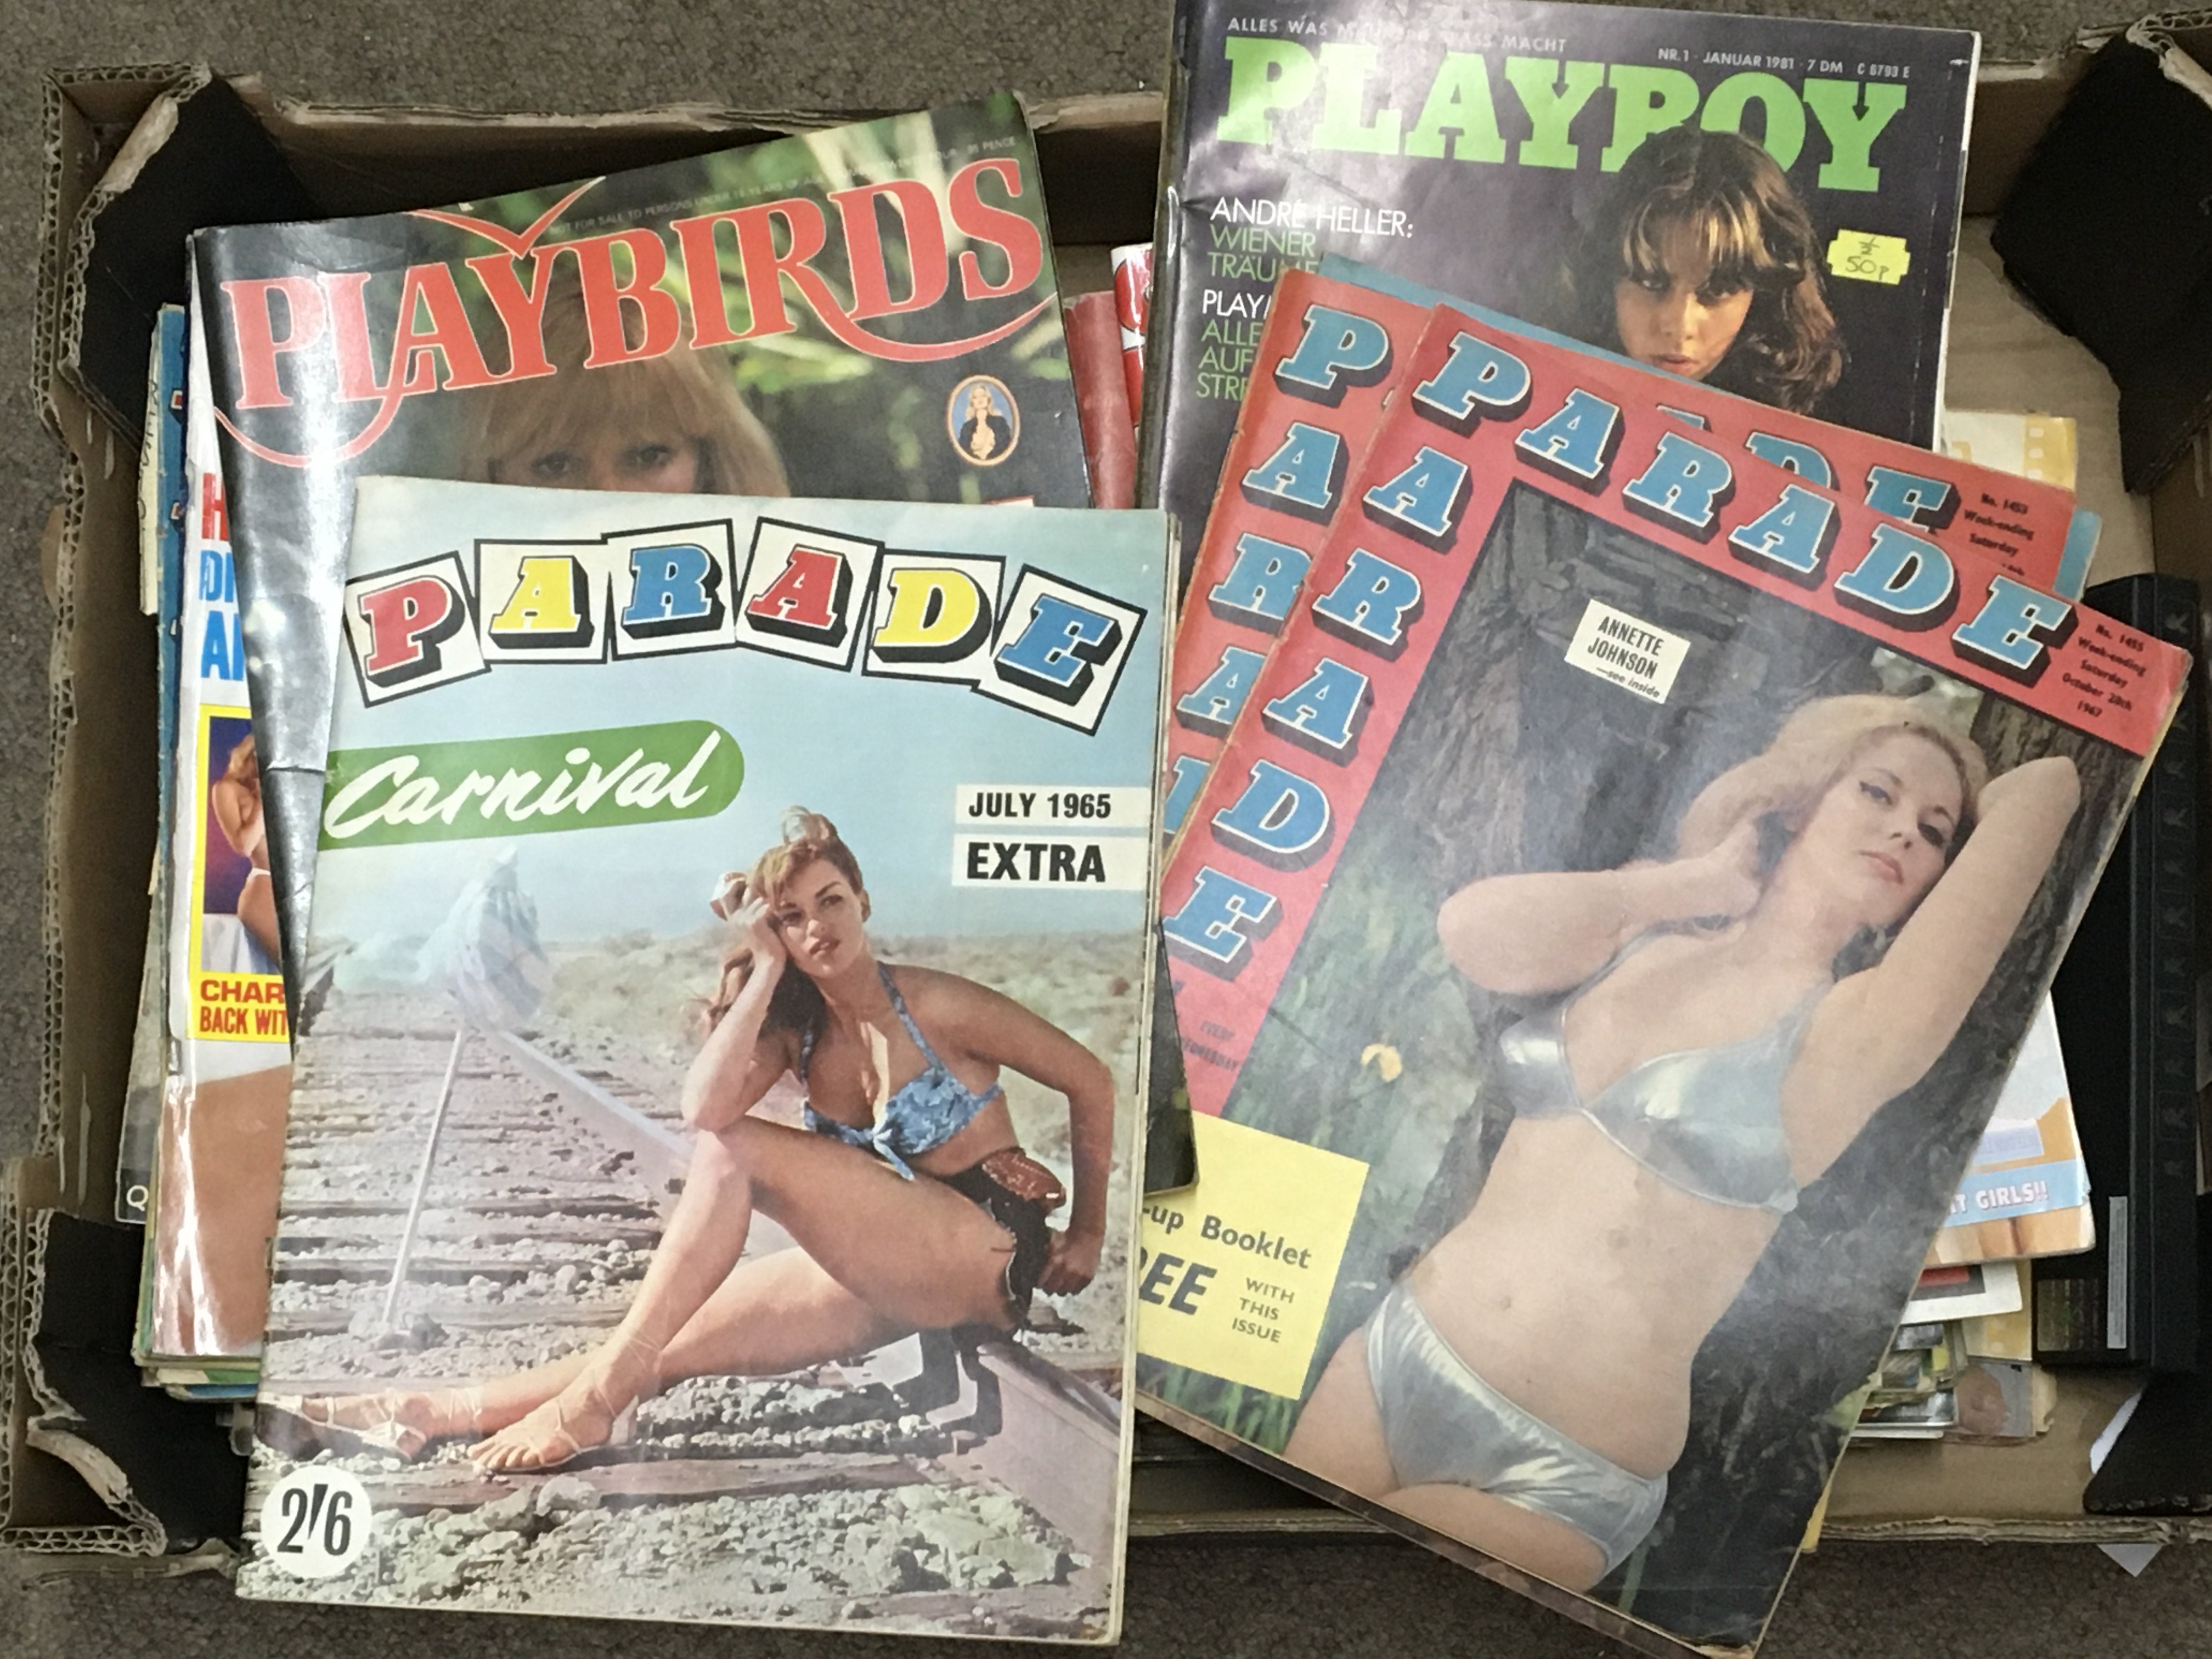 A box containing a collection of adult magazines Playboy, Parade, etc